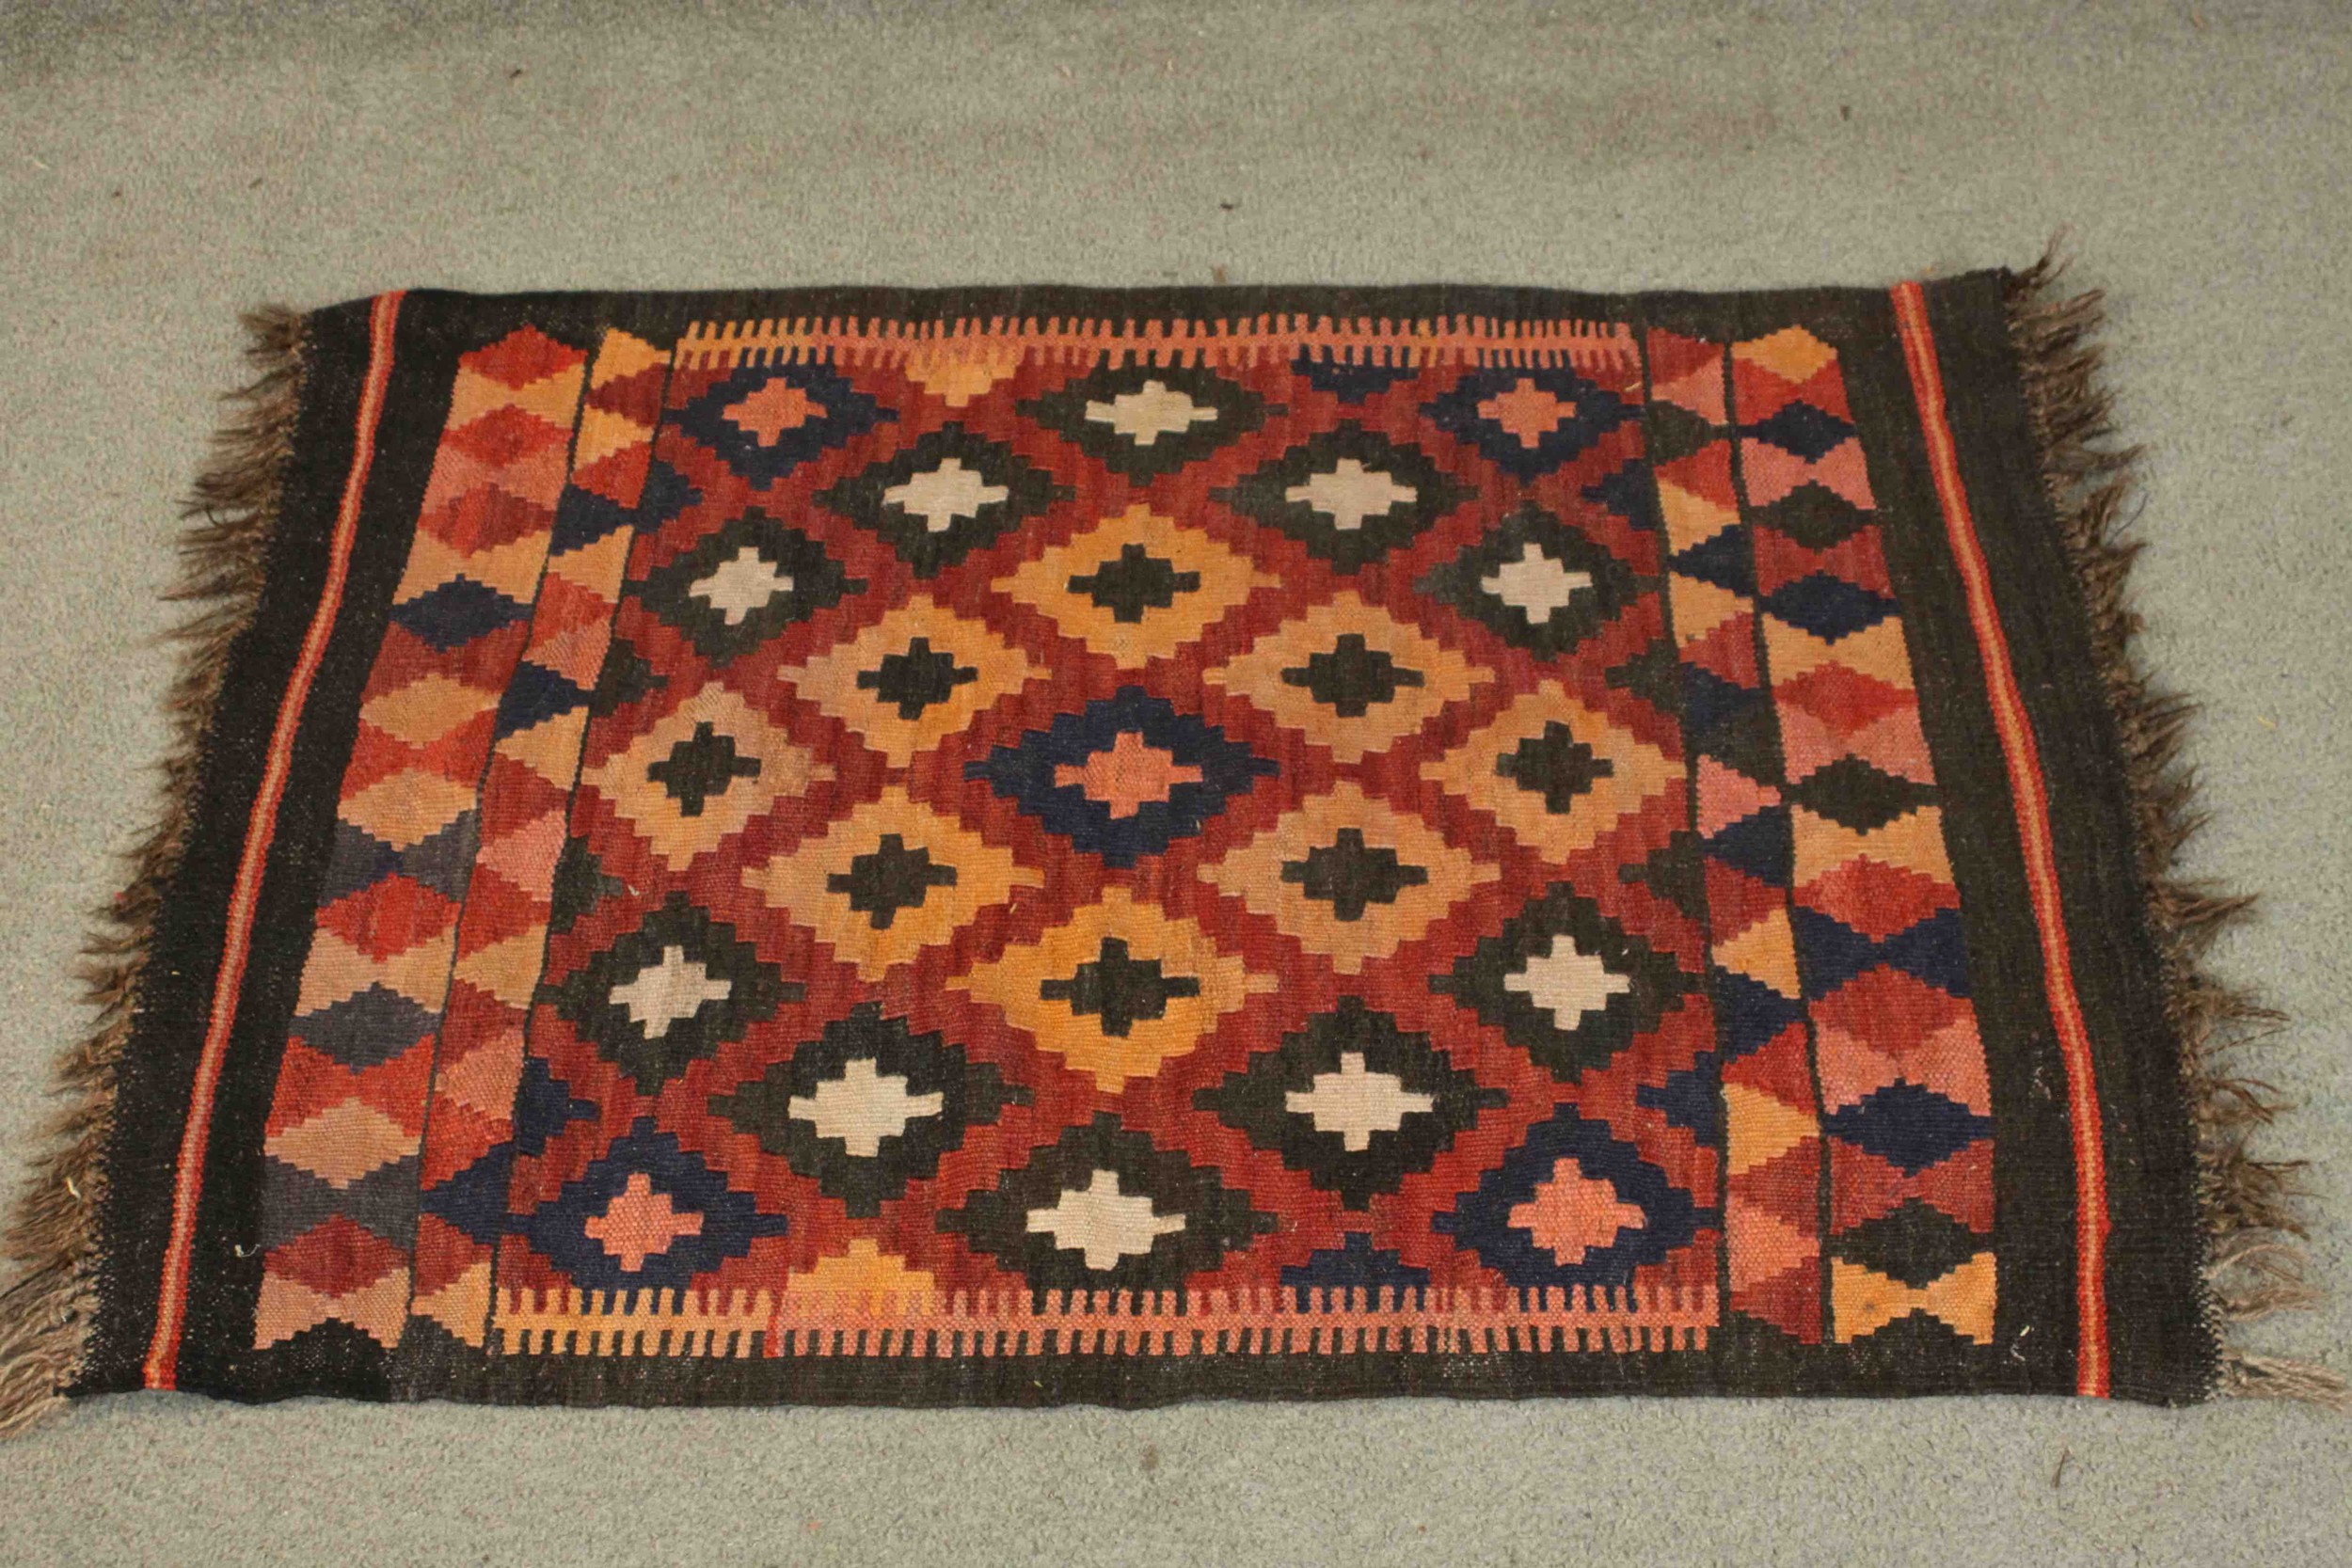 An Afghan Kelim rug with repeating diamond motif on a terracotta ground. L.94 W.69cm.